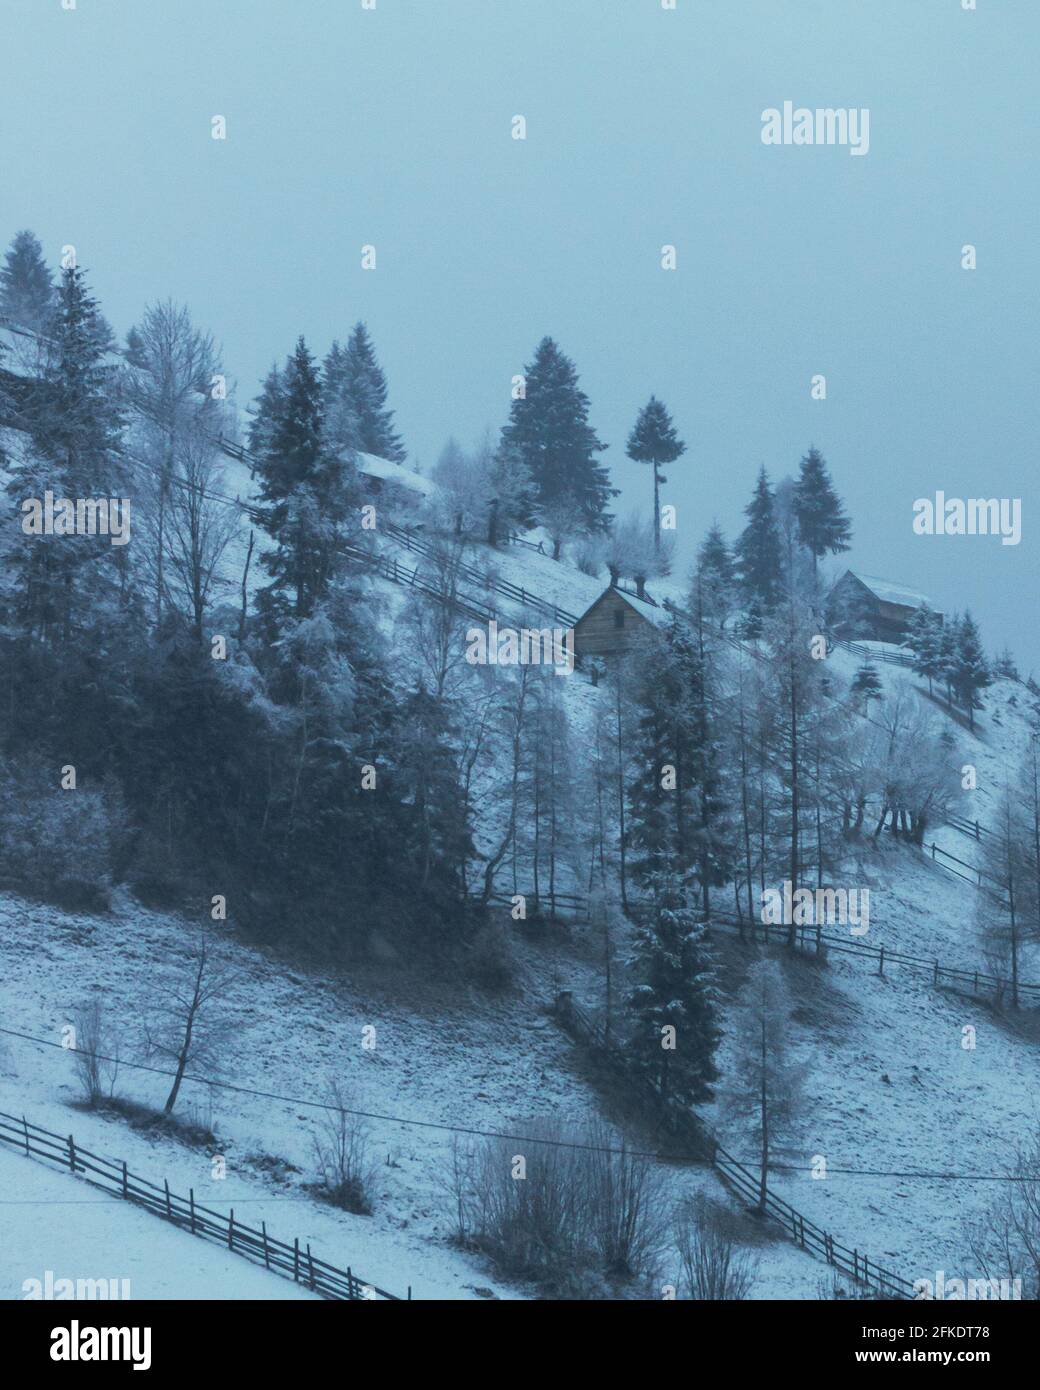 Vertical shot of a snowy hill with trees and cabins on a foggy weather Stock Photo